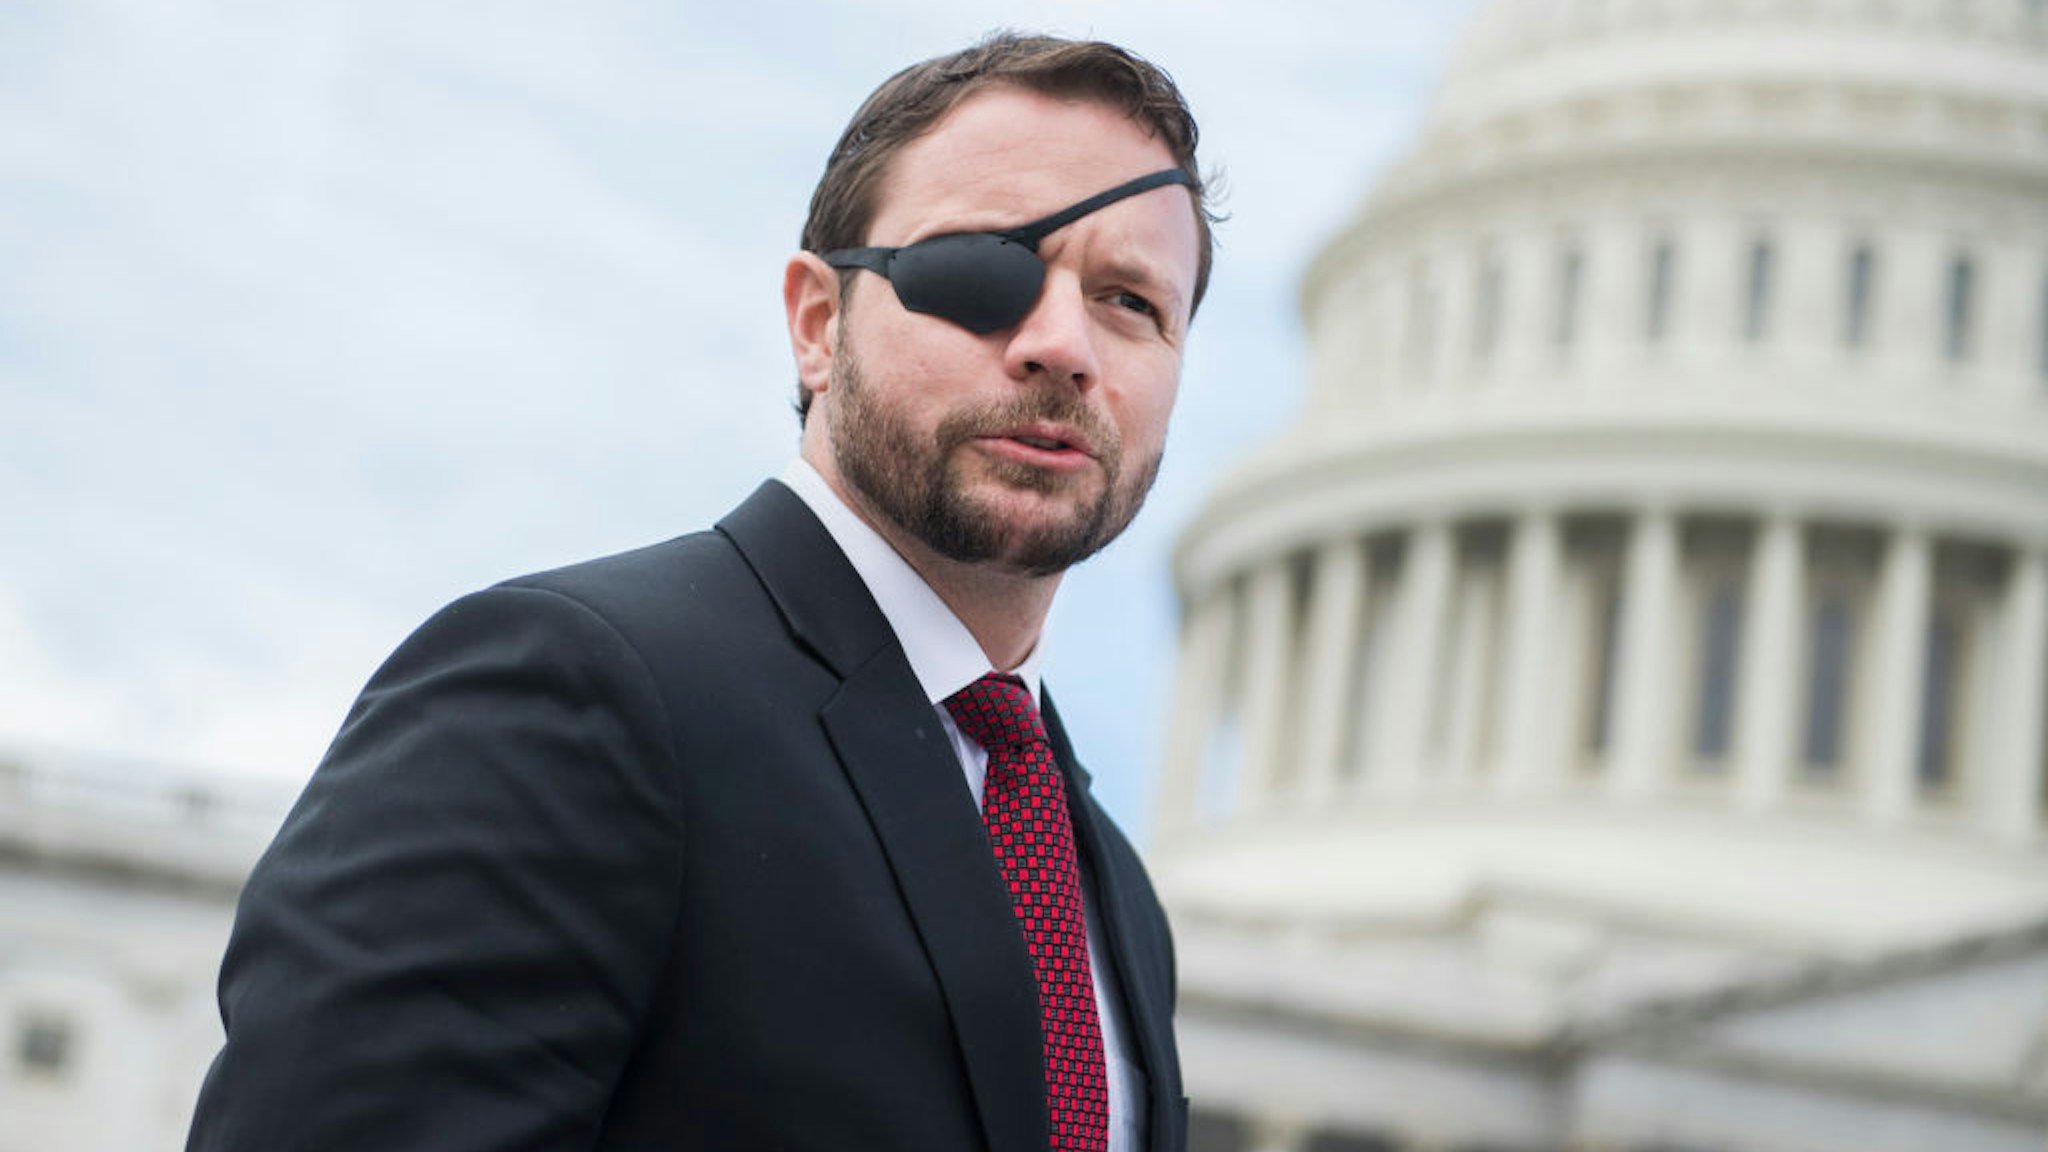 Rep.-elect Dan Crenshaw, R-Texas, is seen after the freshman class photo on the East Front of the Capitol on November 14, 2018.